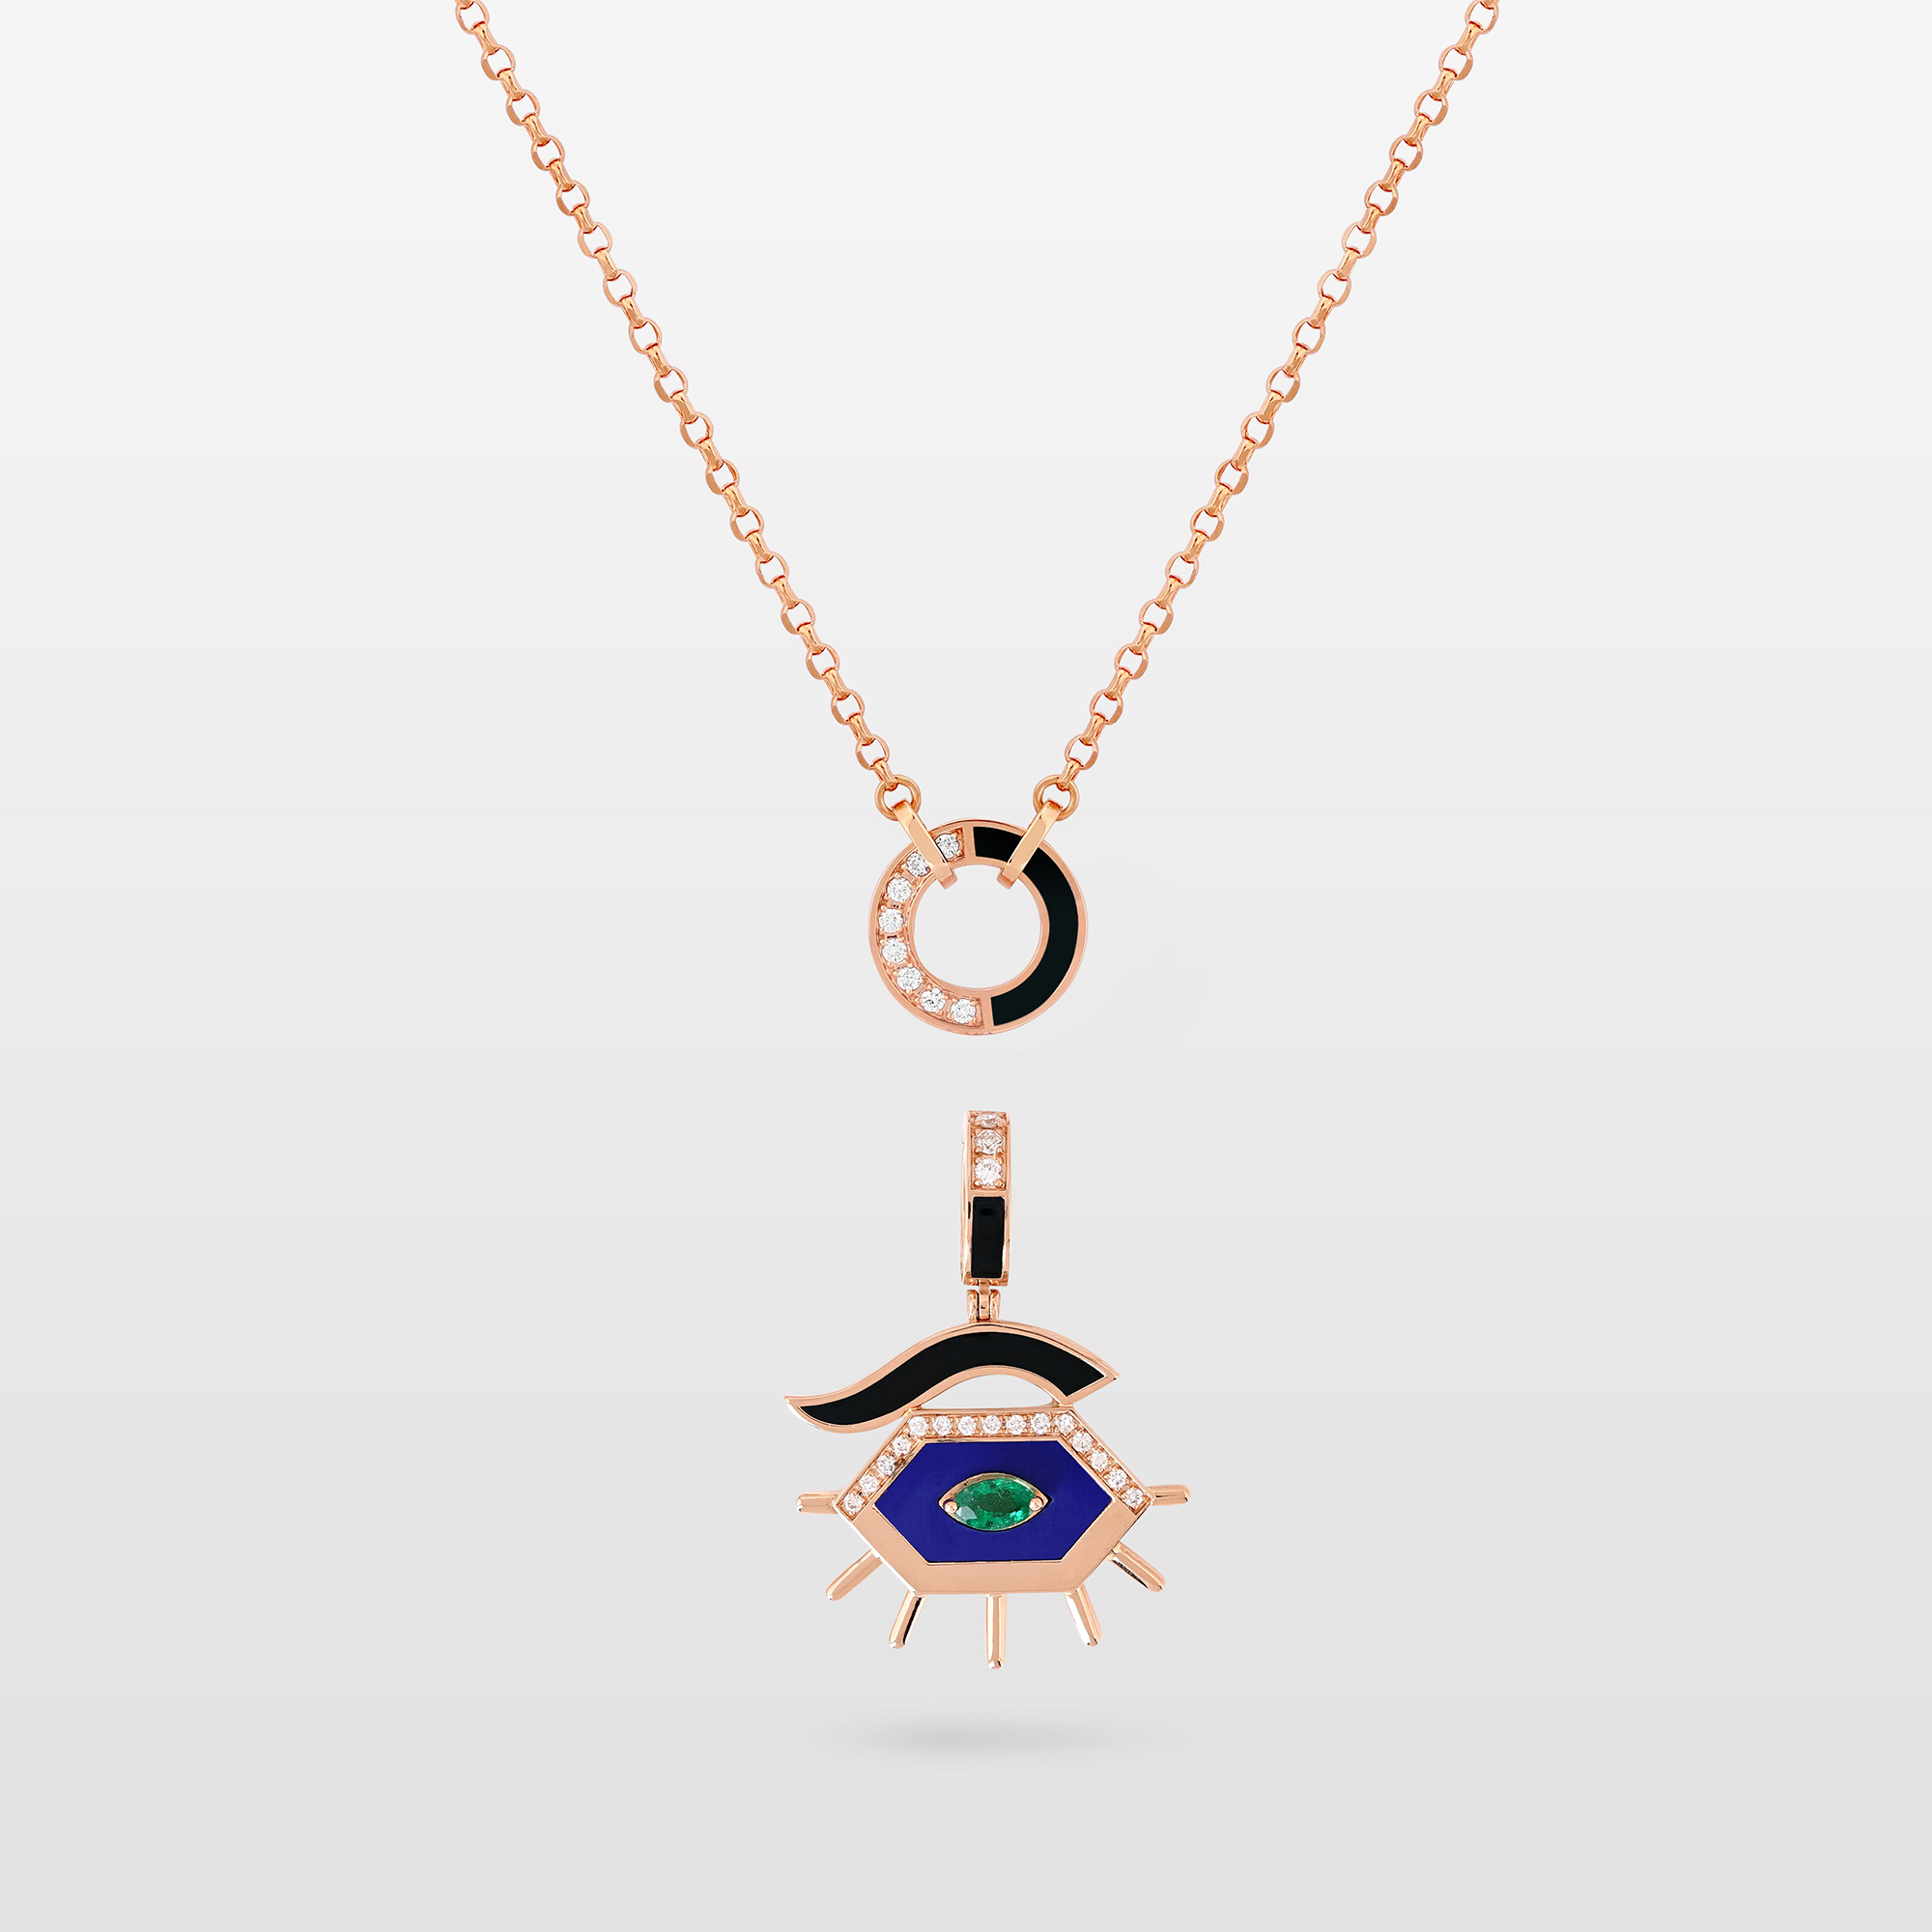 Behind Her Eyes Necklace